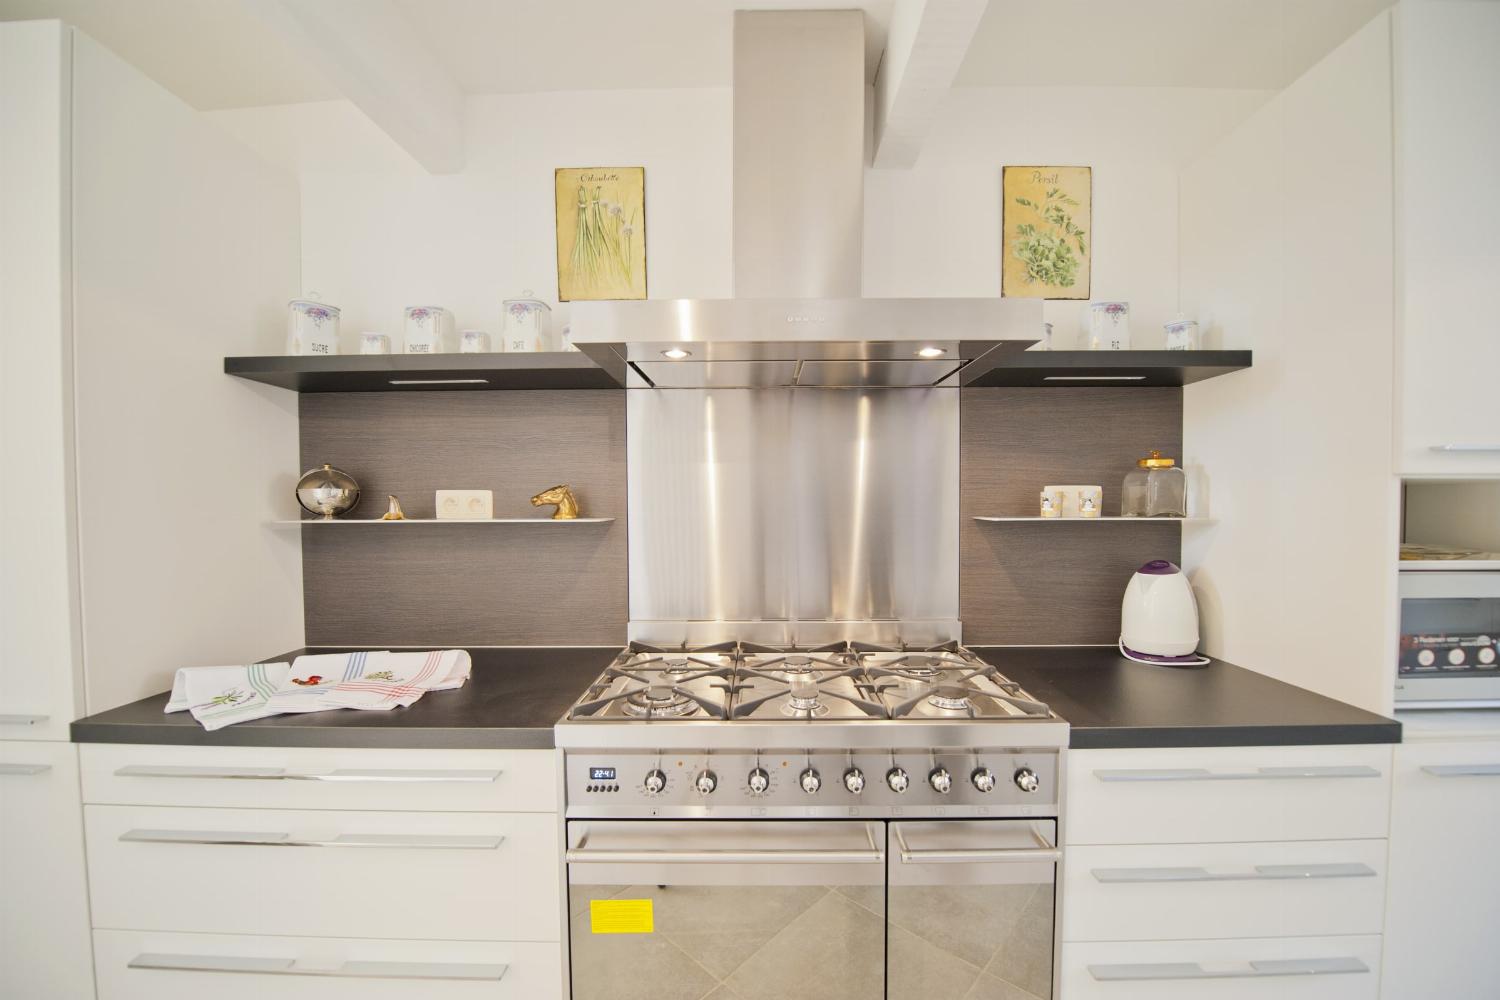 Kitchen | Rental accommodation in Provence